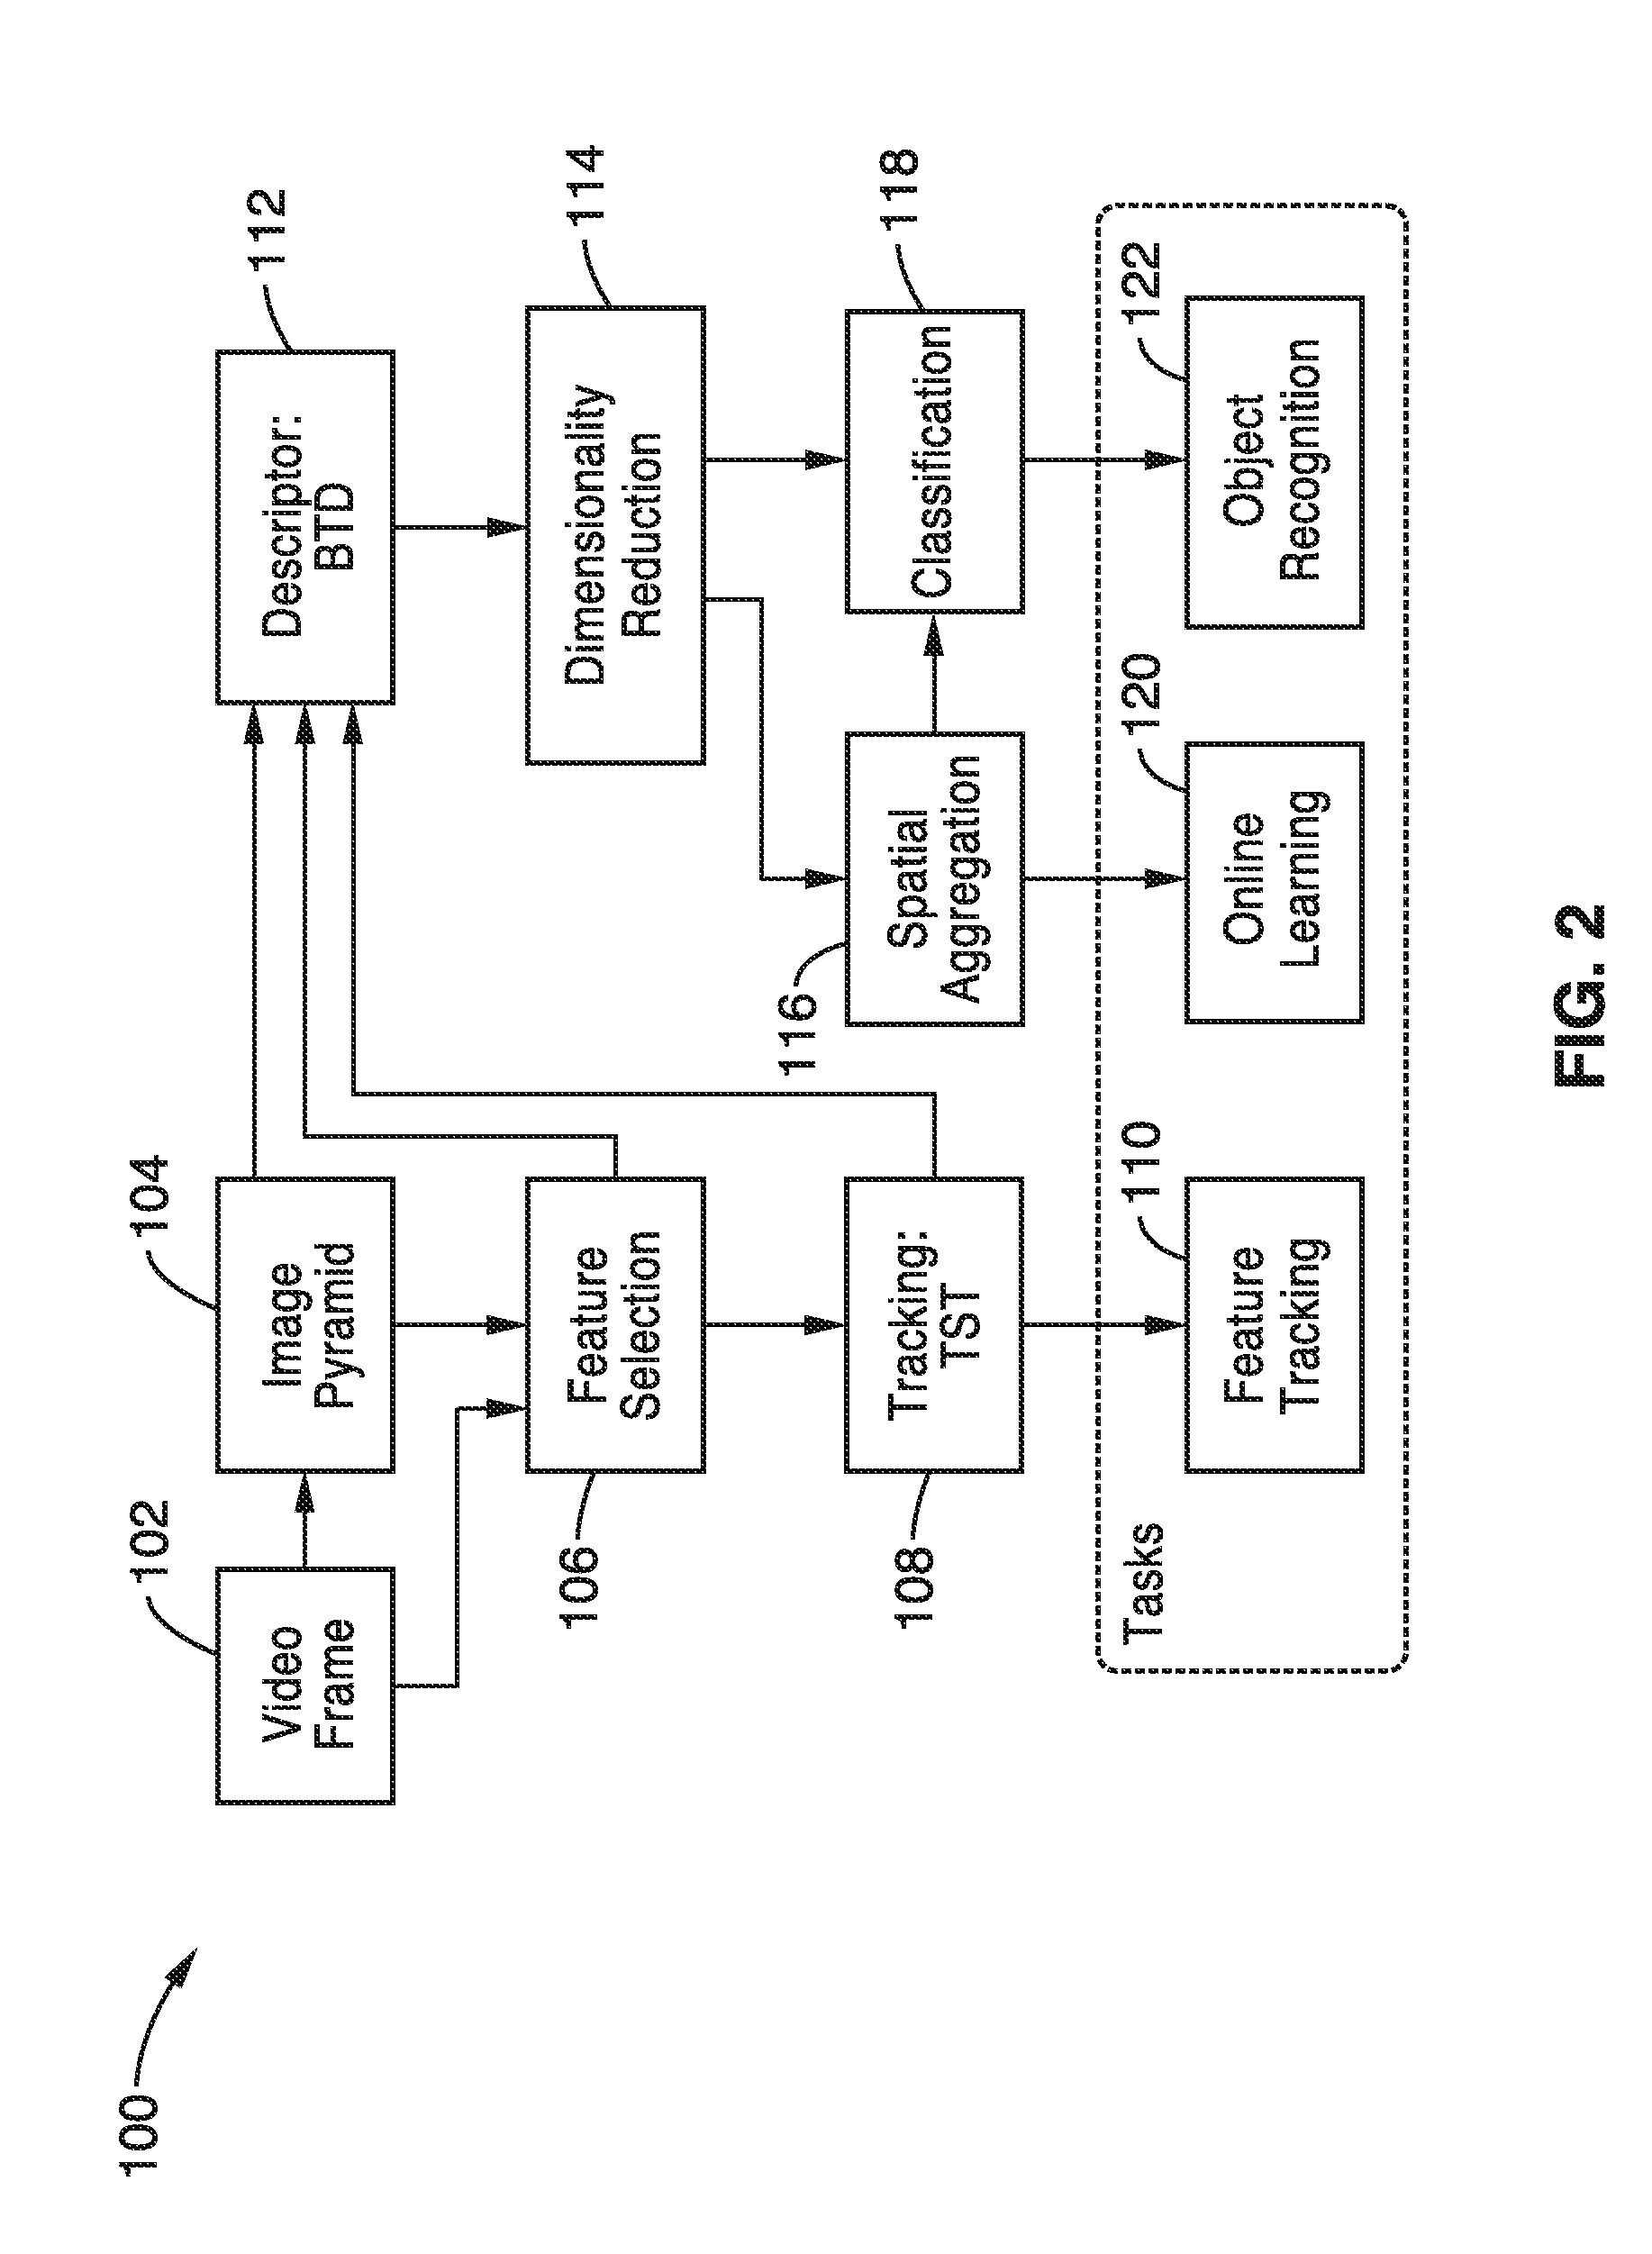 End-to-end visual recognition system and methods